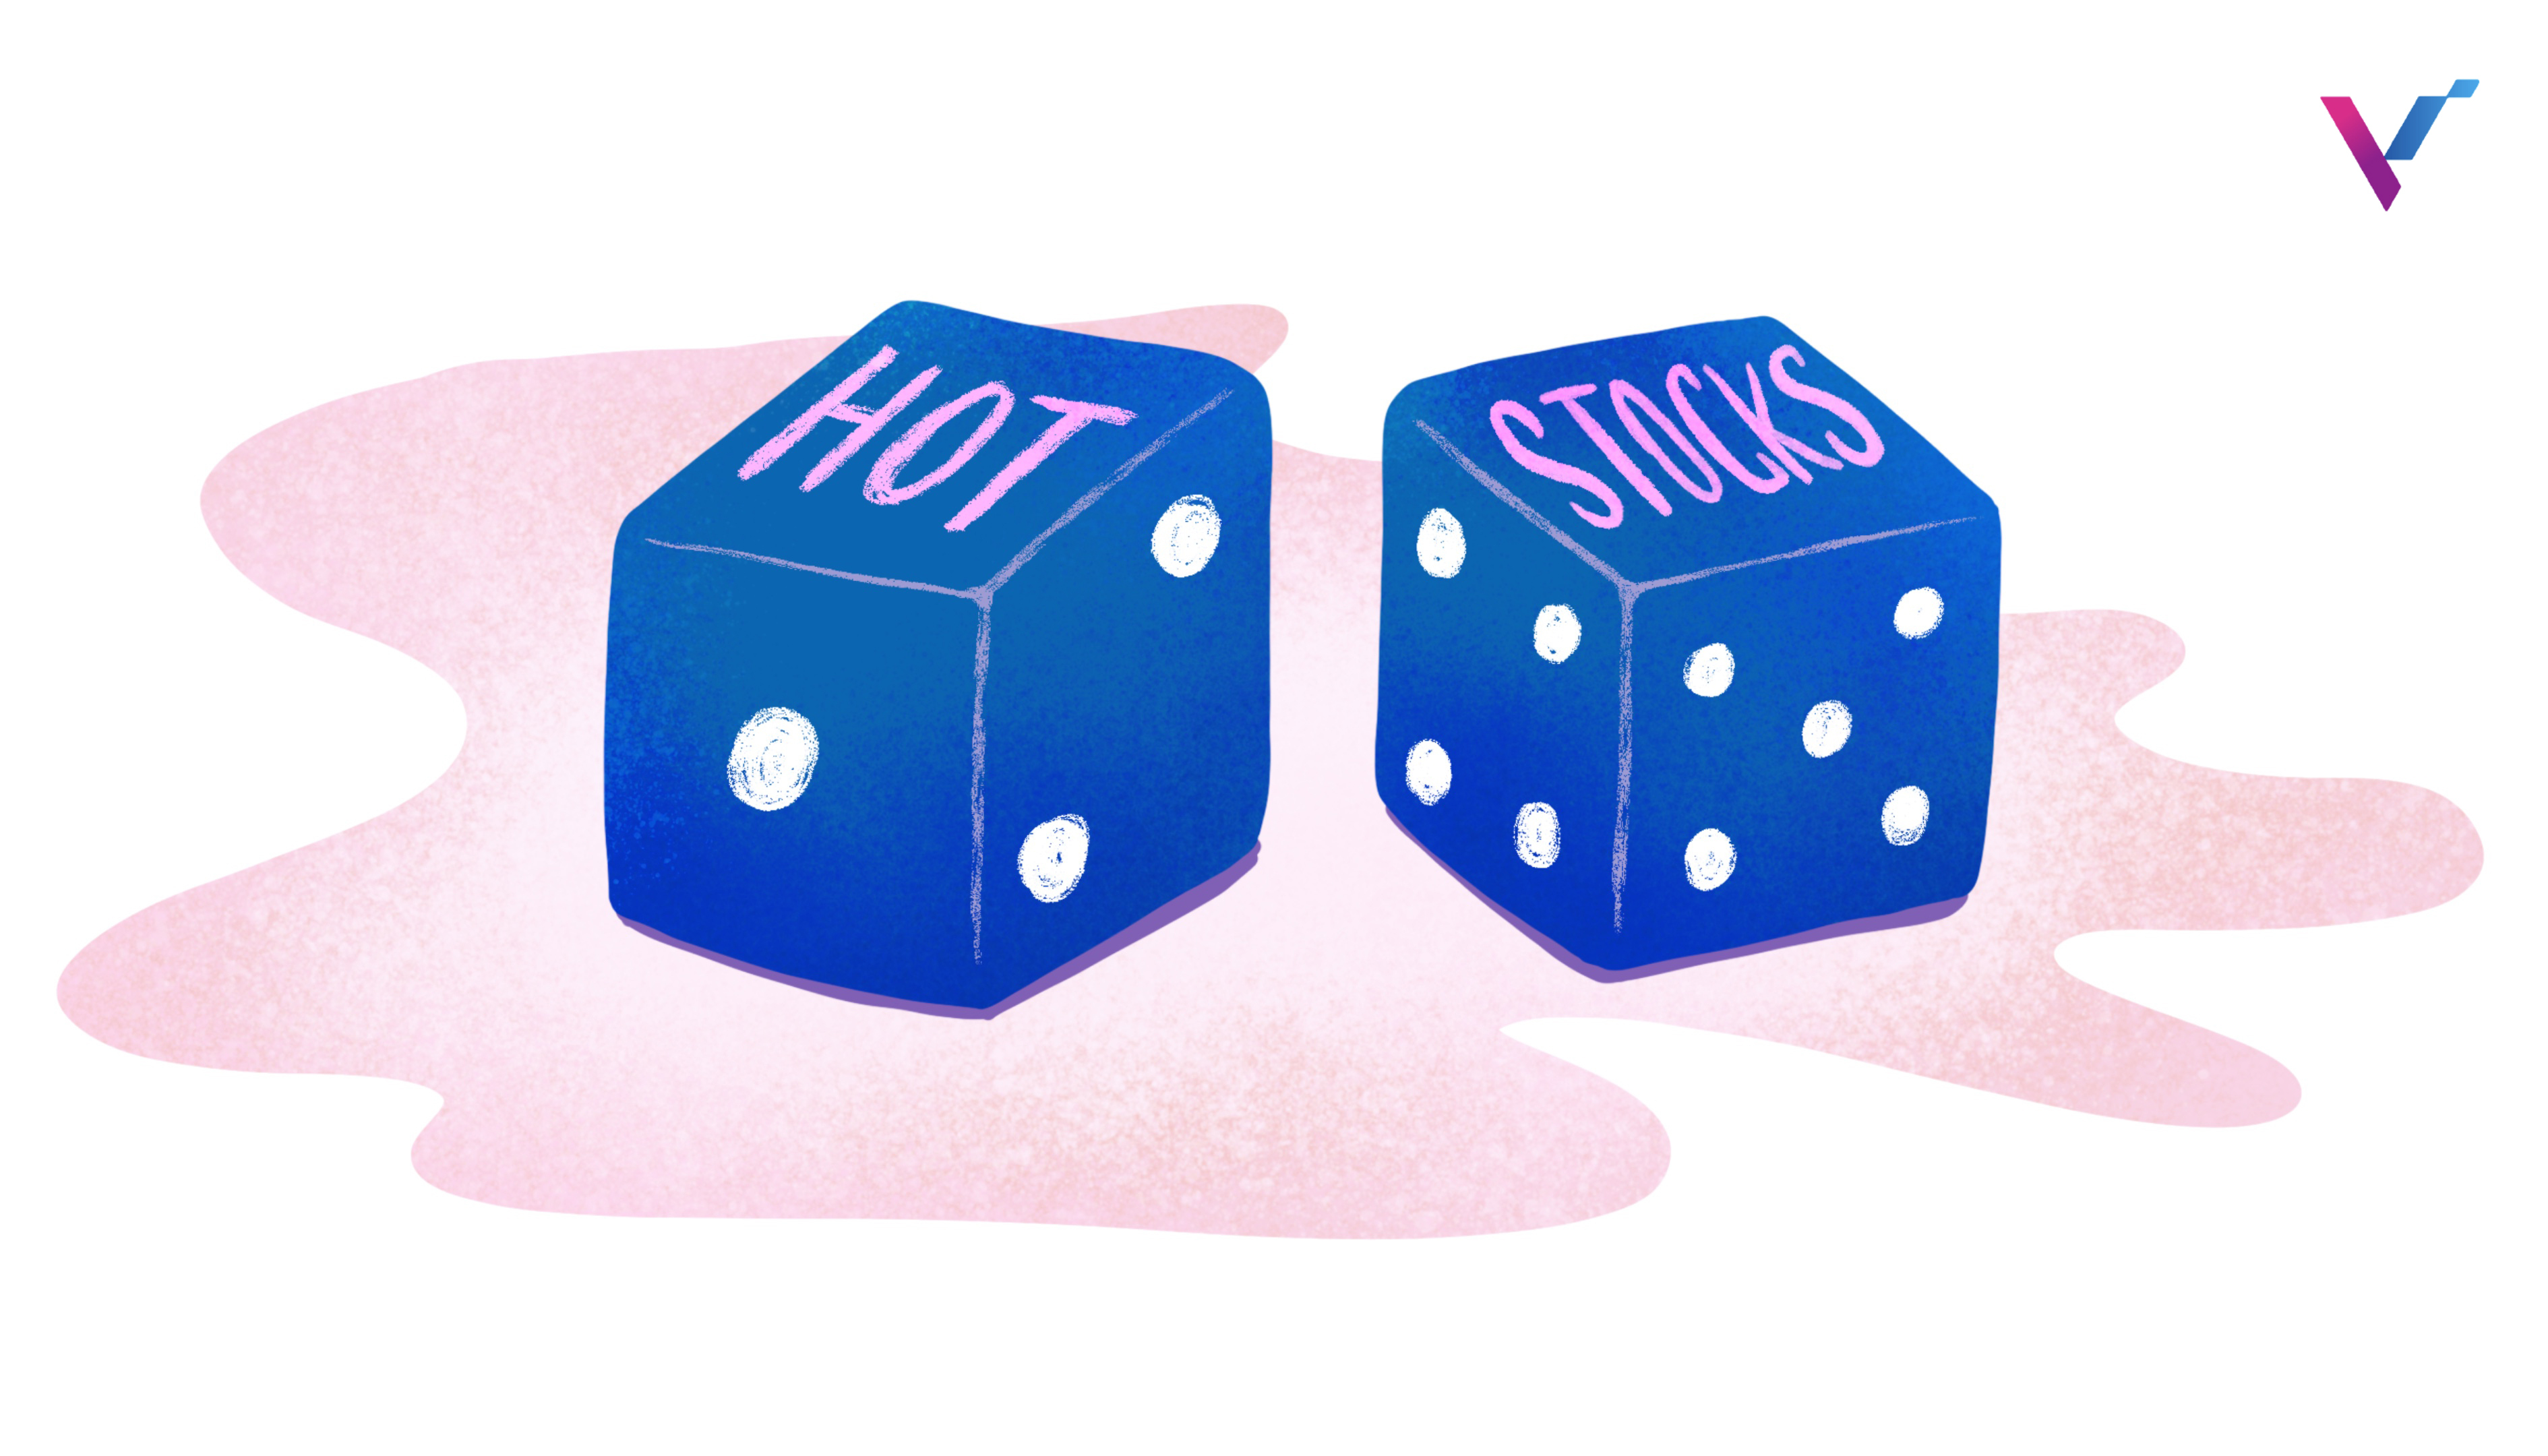 Investing or gambling? | Hot Stocks or Quality Businesses?